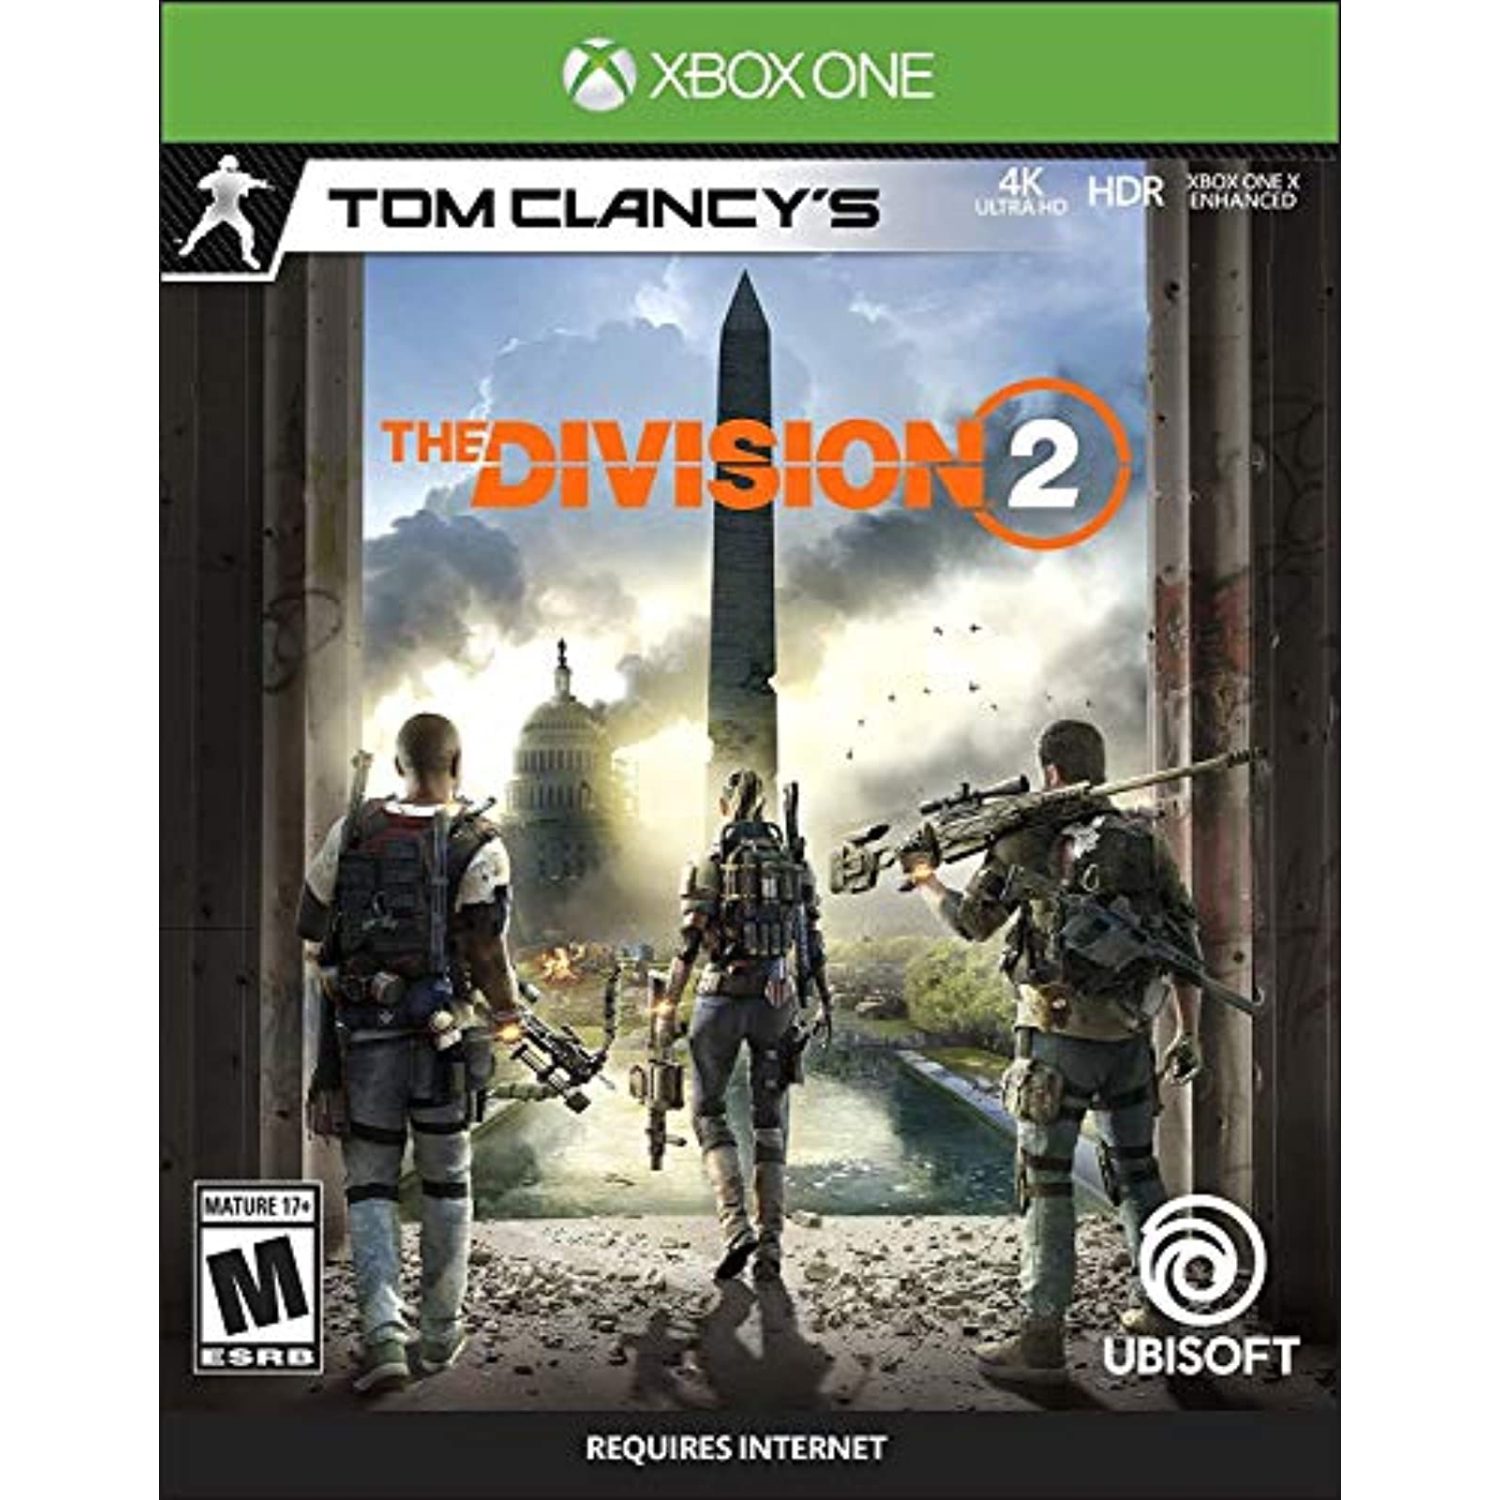 Previously Played - Tom Clancy's The Division 2, Ubisoft, Xbox One